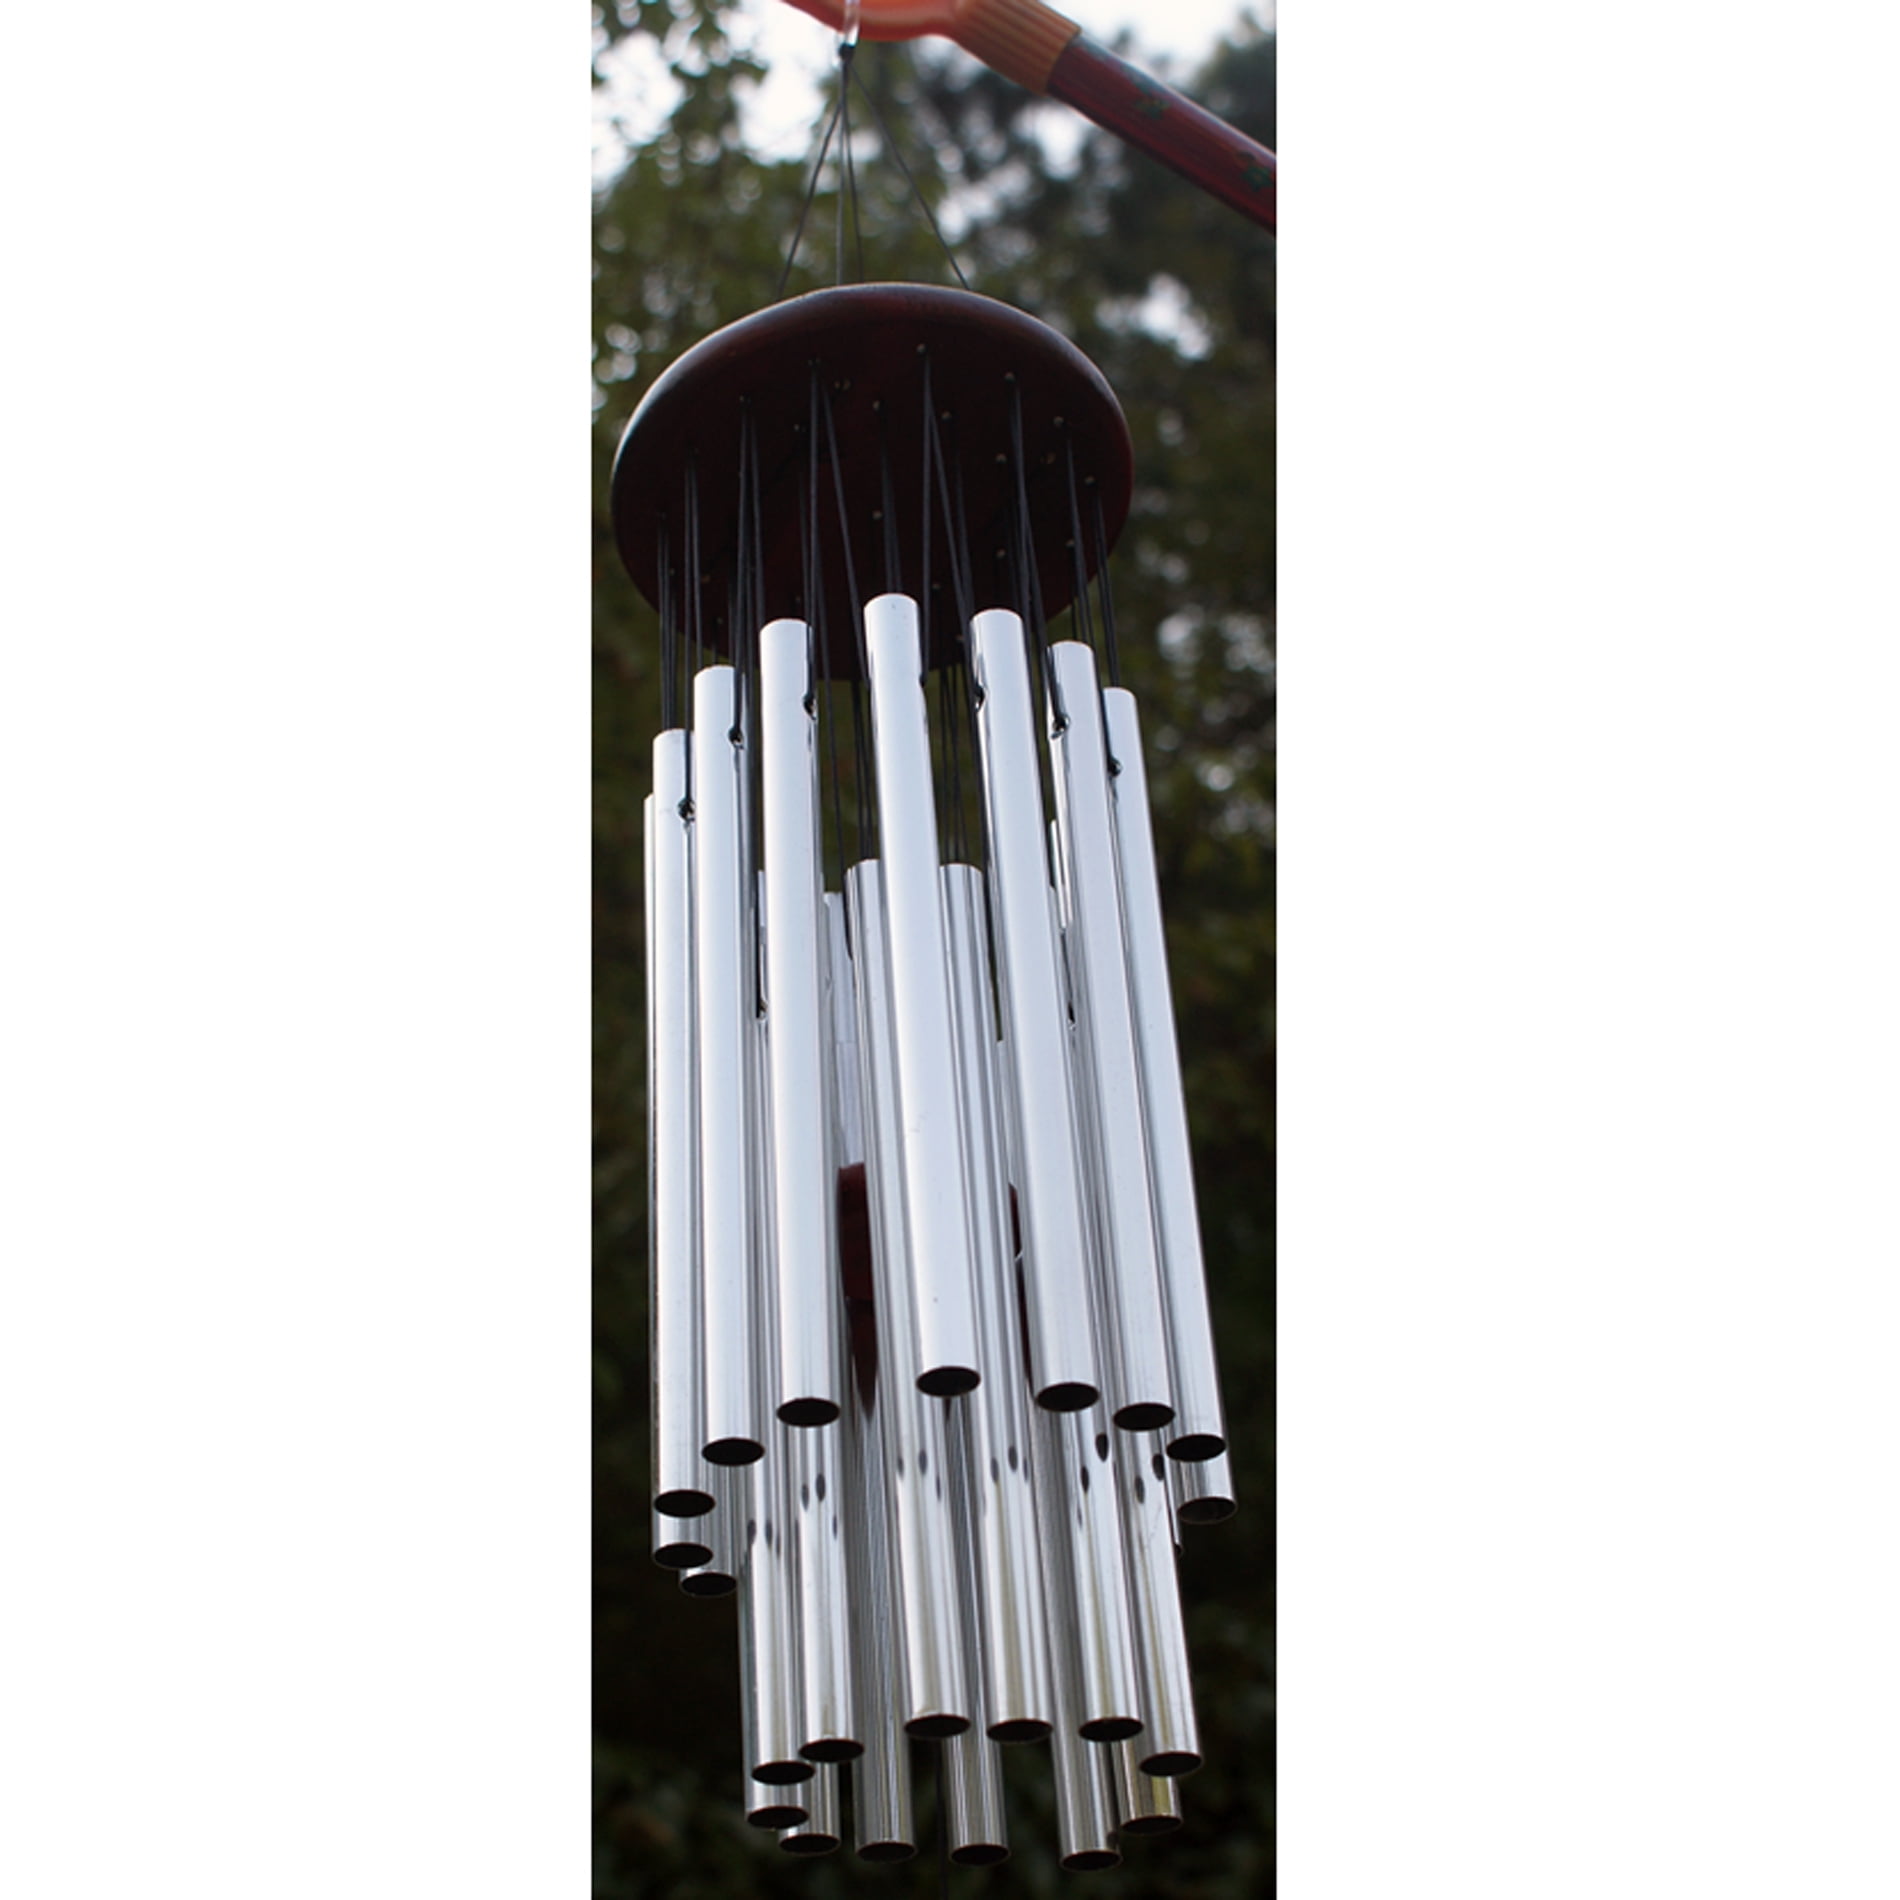 esonmus Wind Chimes Outdoor Aluminum Chime 35 Wind Bell Aluminum Tube Chimes Prayer Chime for Outdoor Patio Backyard Home Decor